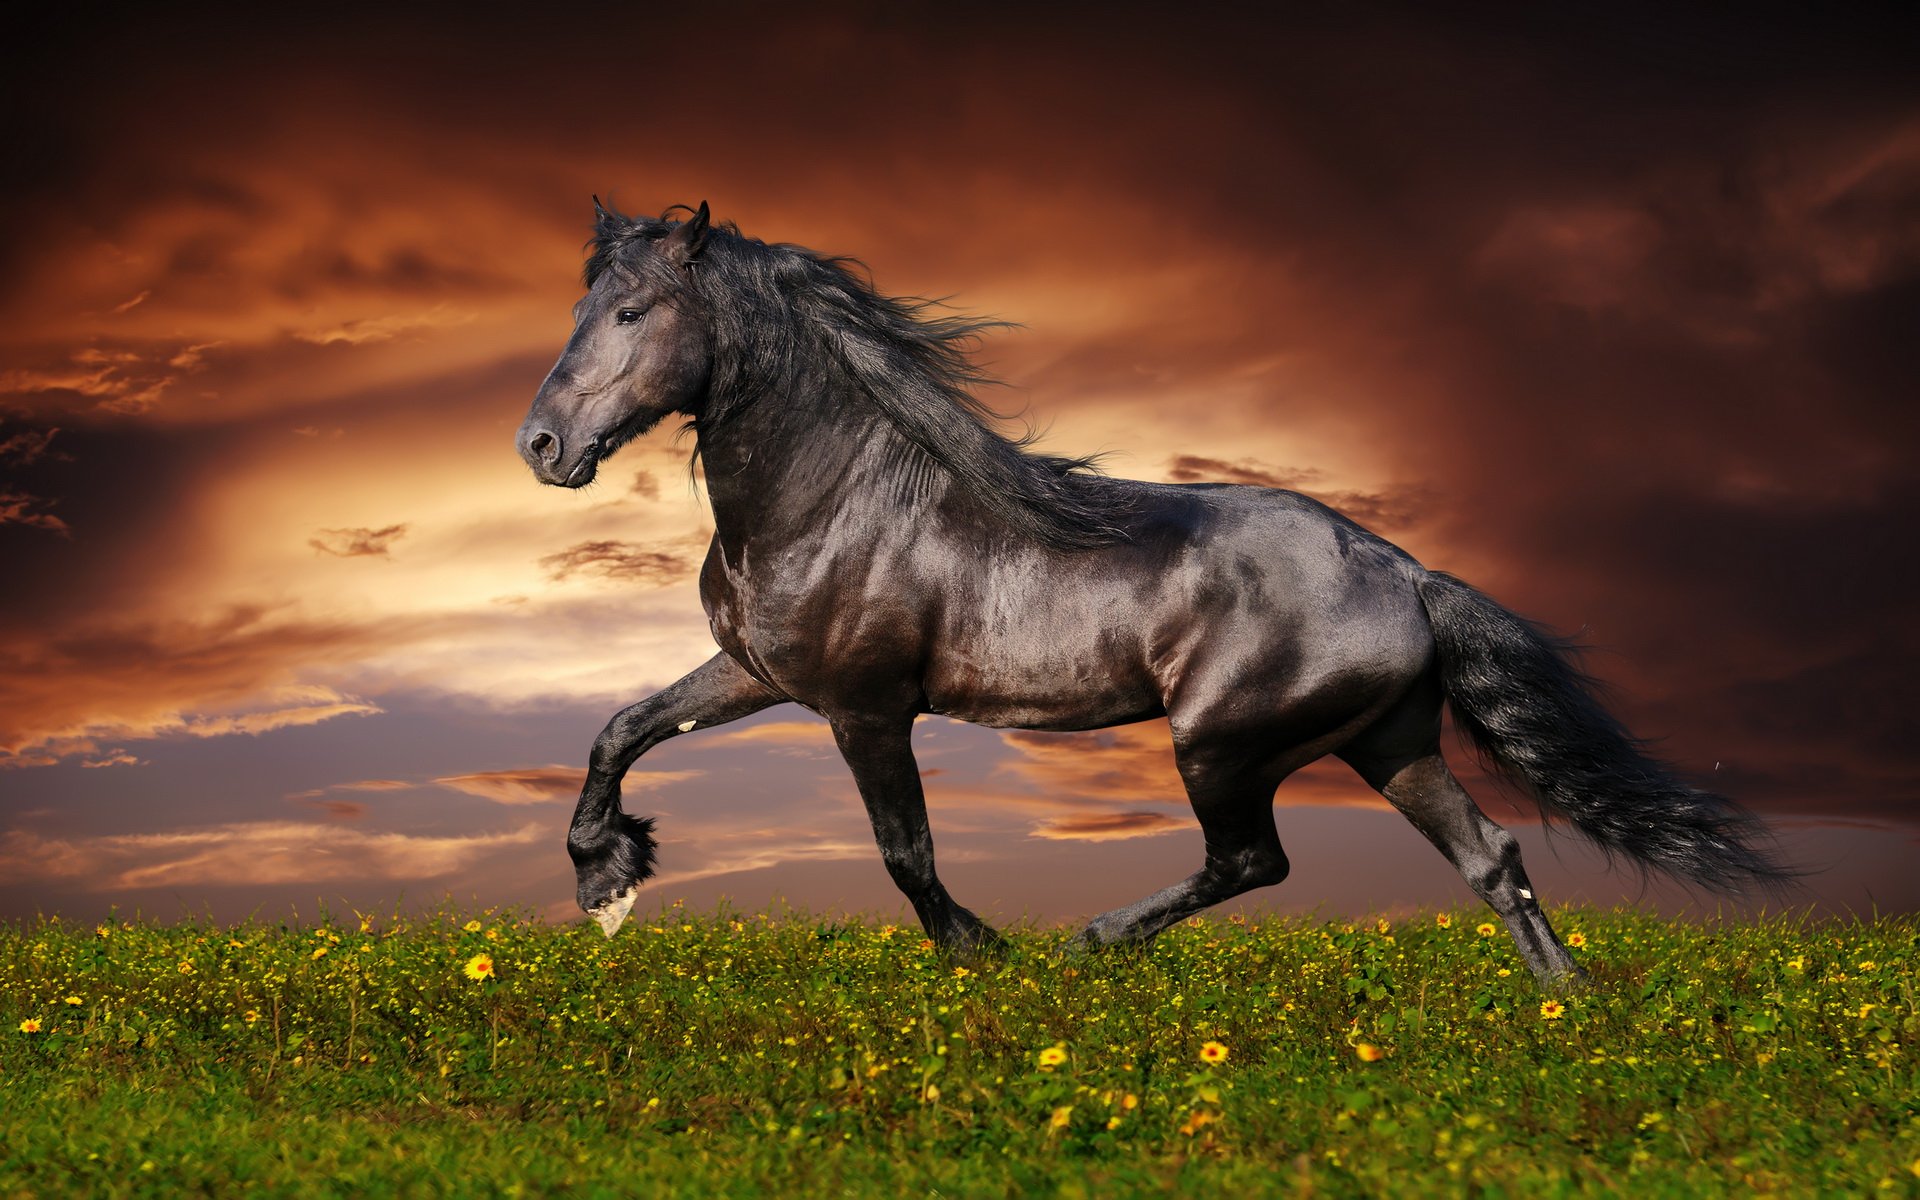  Horse  HD  Wallpaper Background Image 1920x1200 ID 